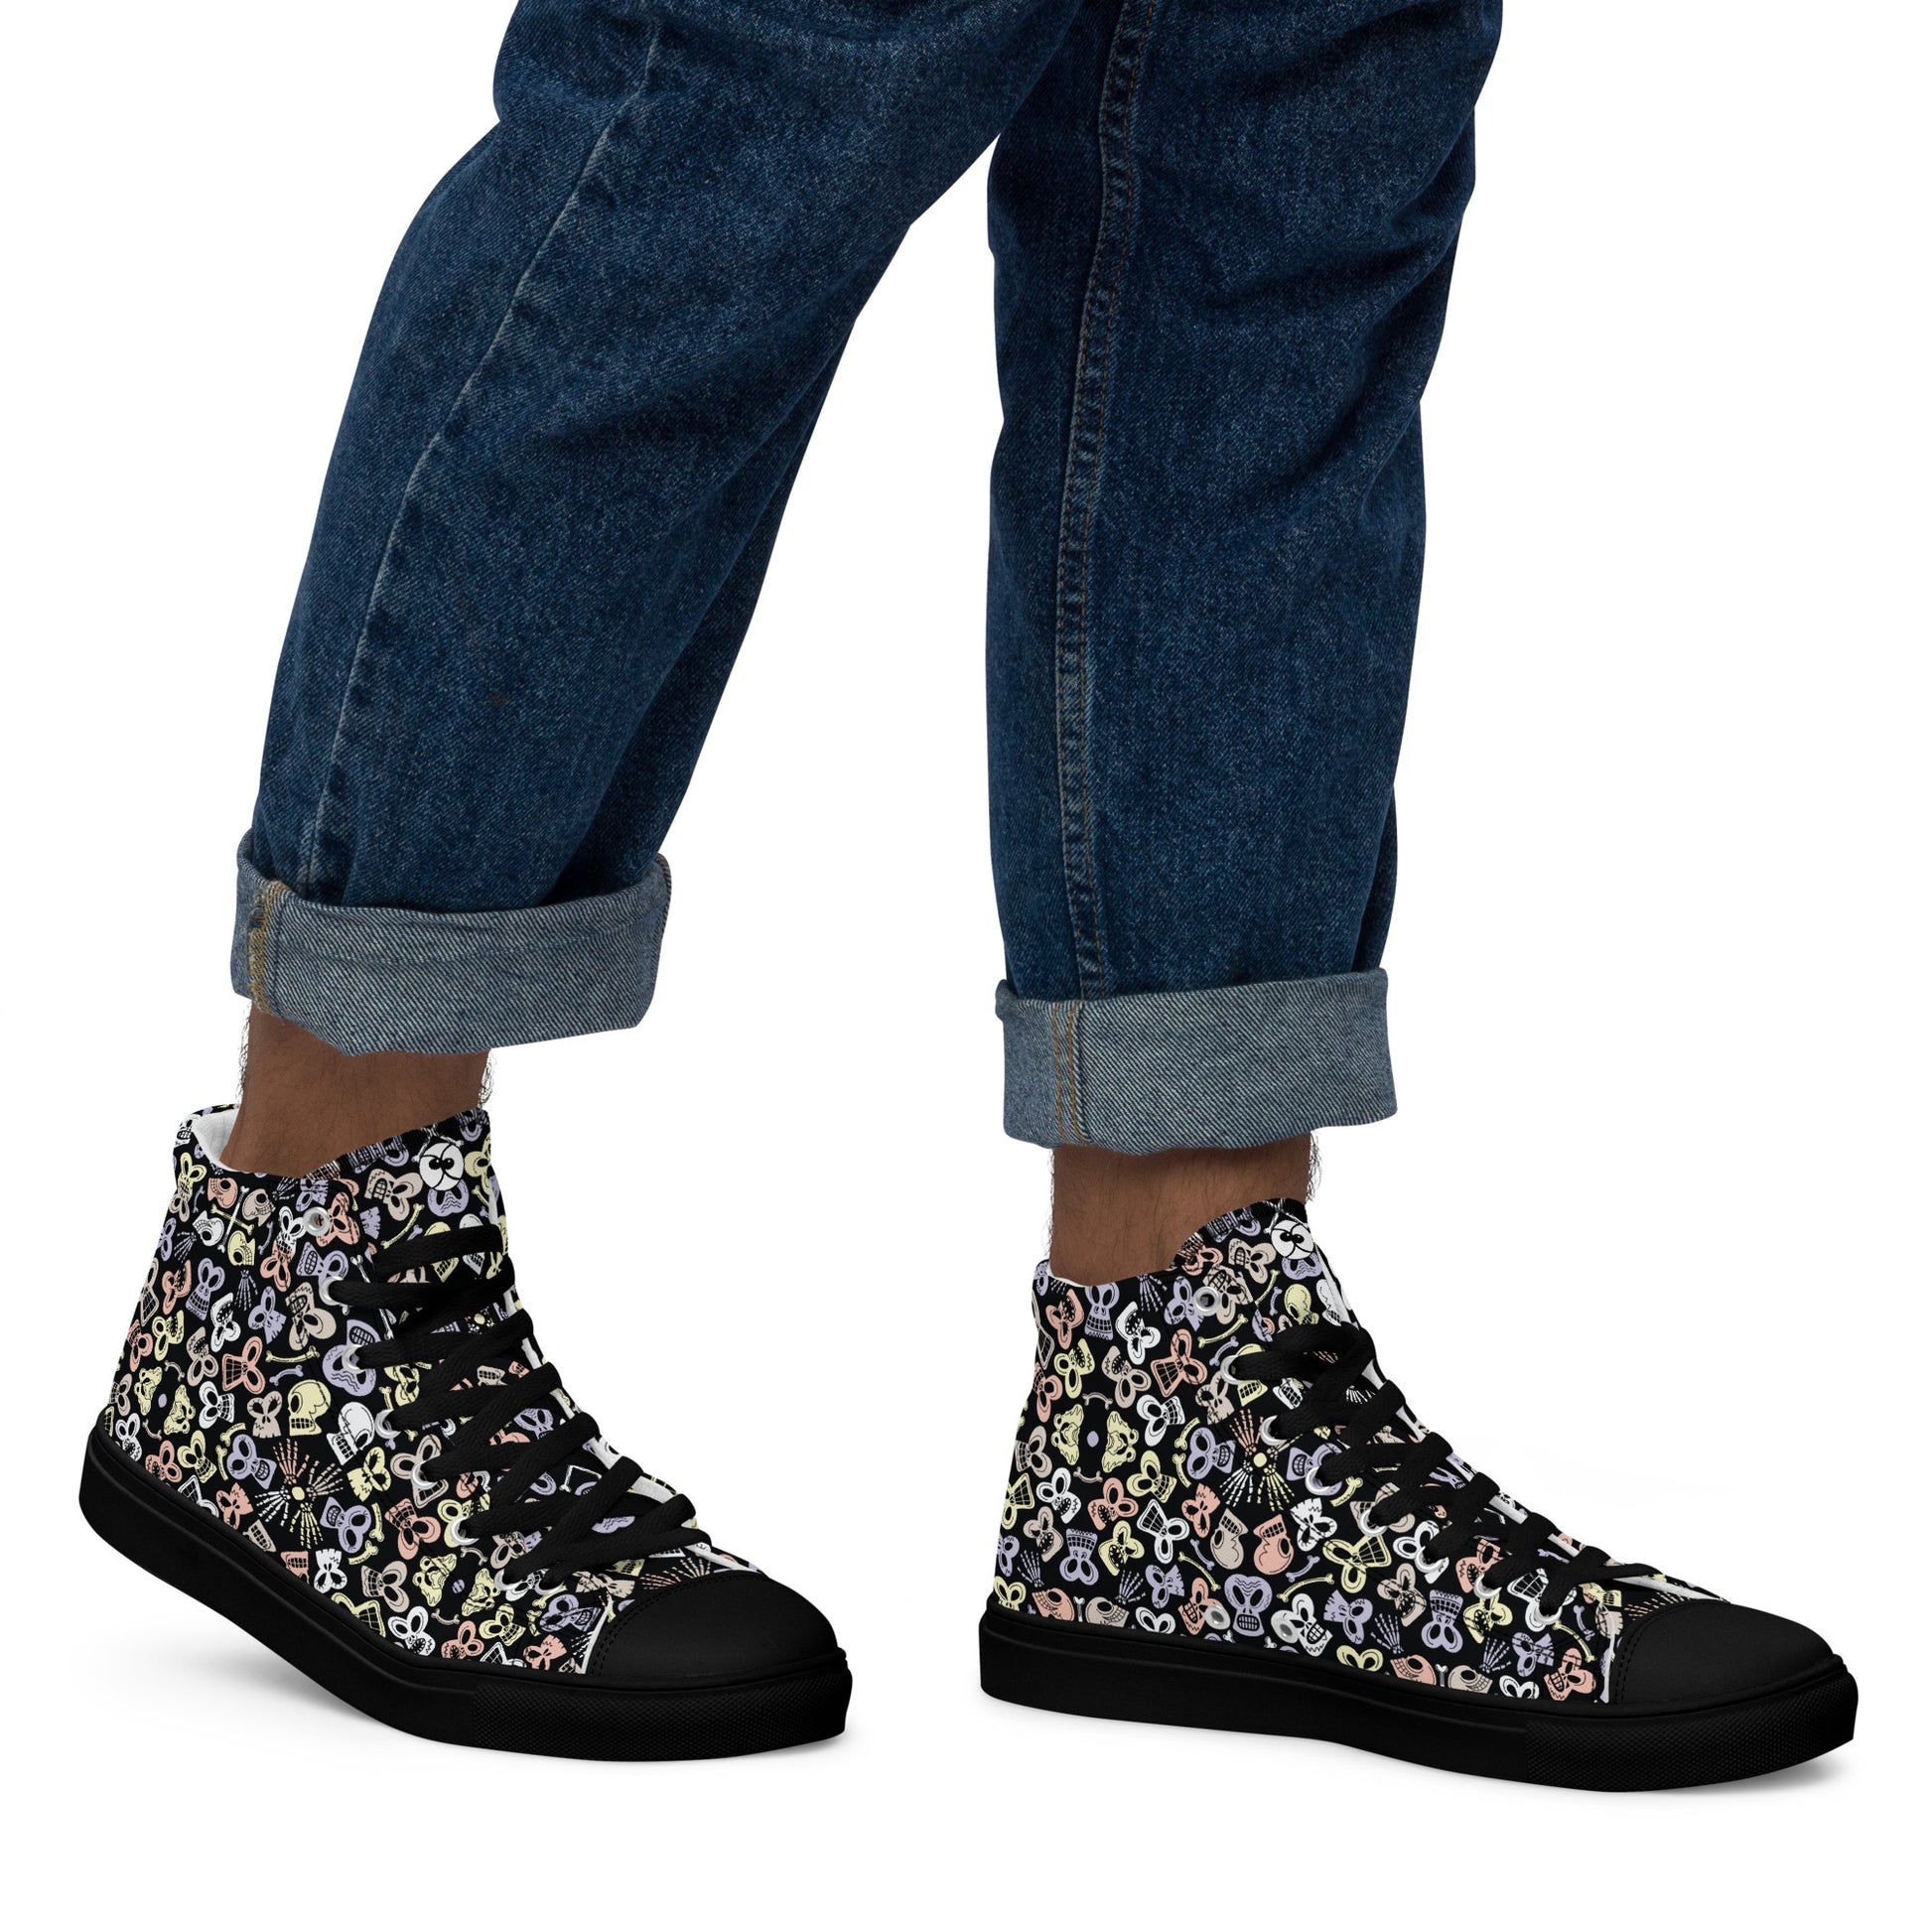 Bewitched Skulls: Hauntingly Chic Pattern Design - Men’s high top canvas shoes. Black color. Lifestyle